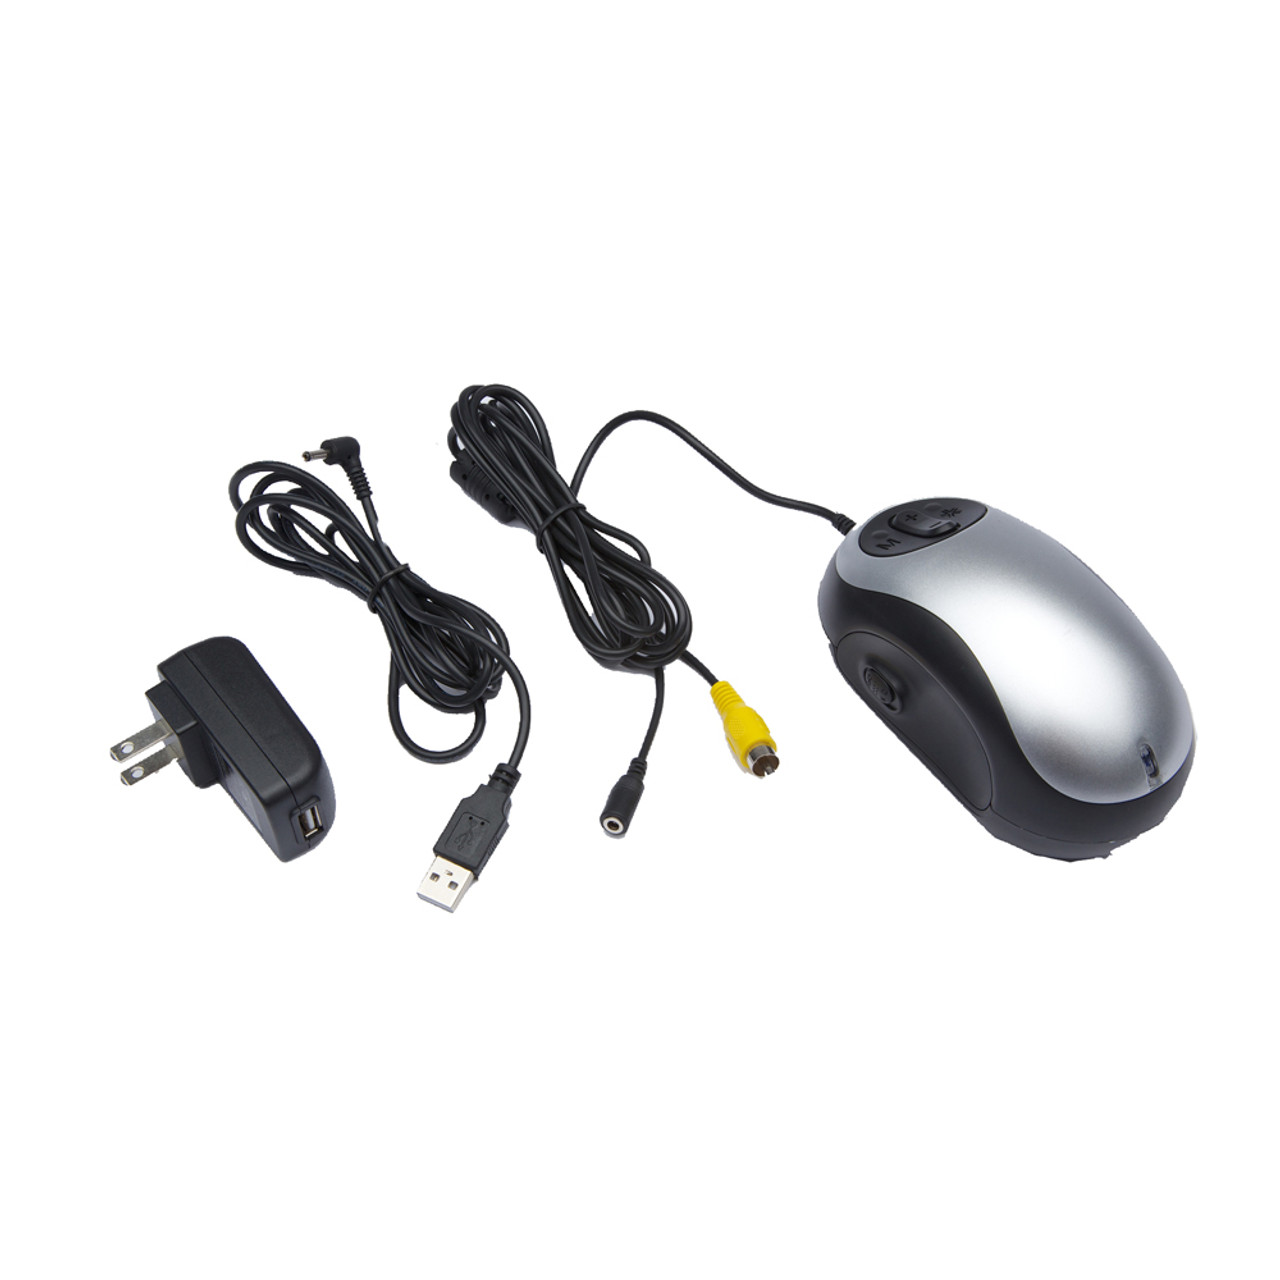 Mouse Style Video Magnifier - TV, Wired